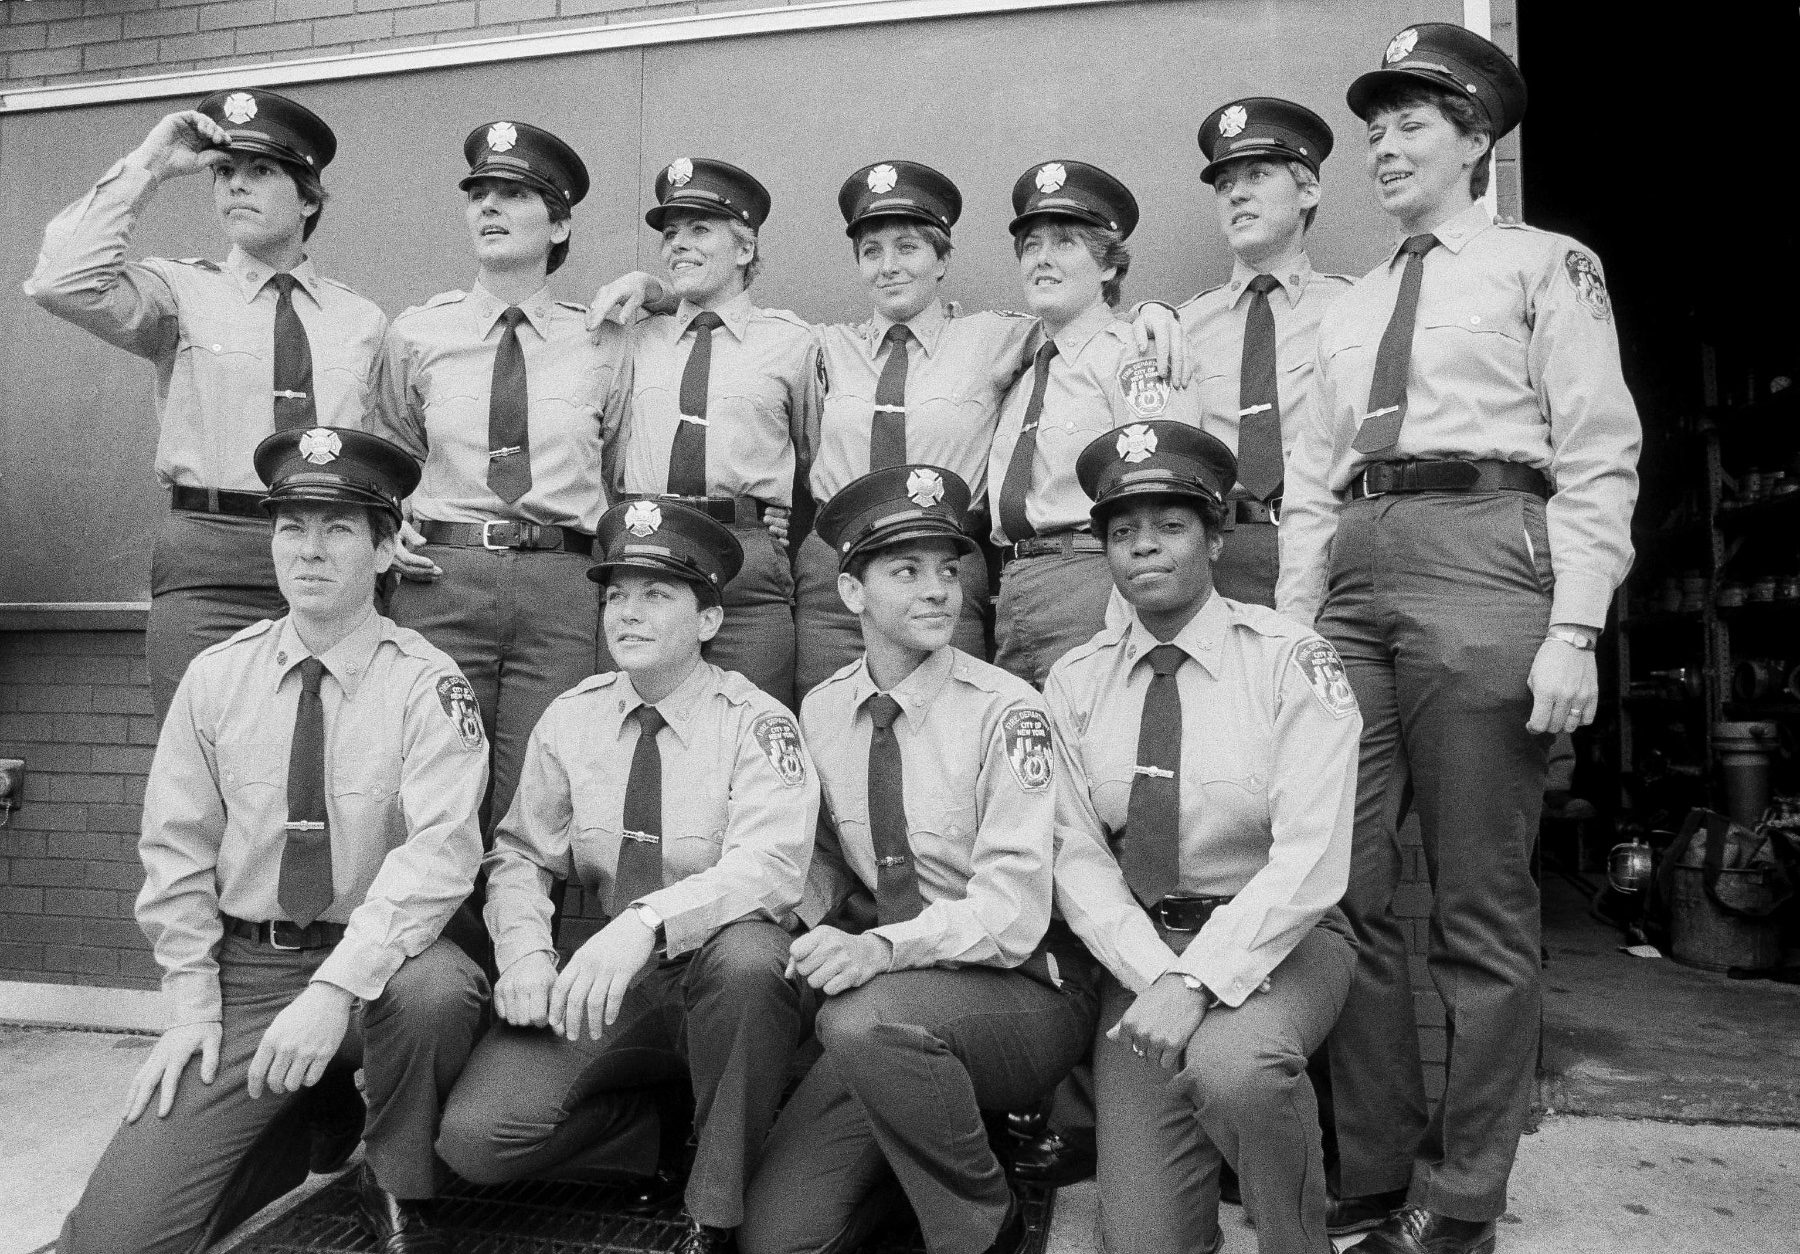 A group of woman firefighters pose in a black and white photo.